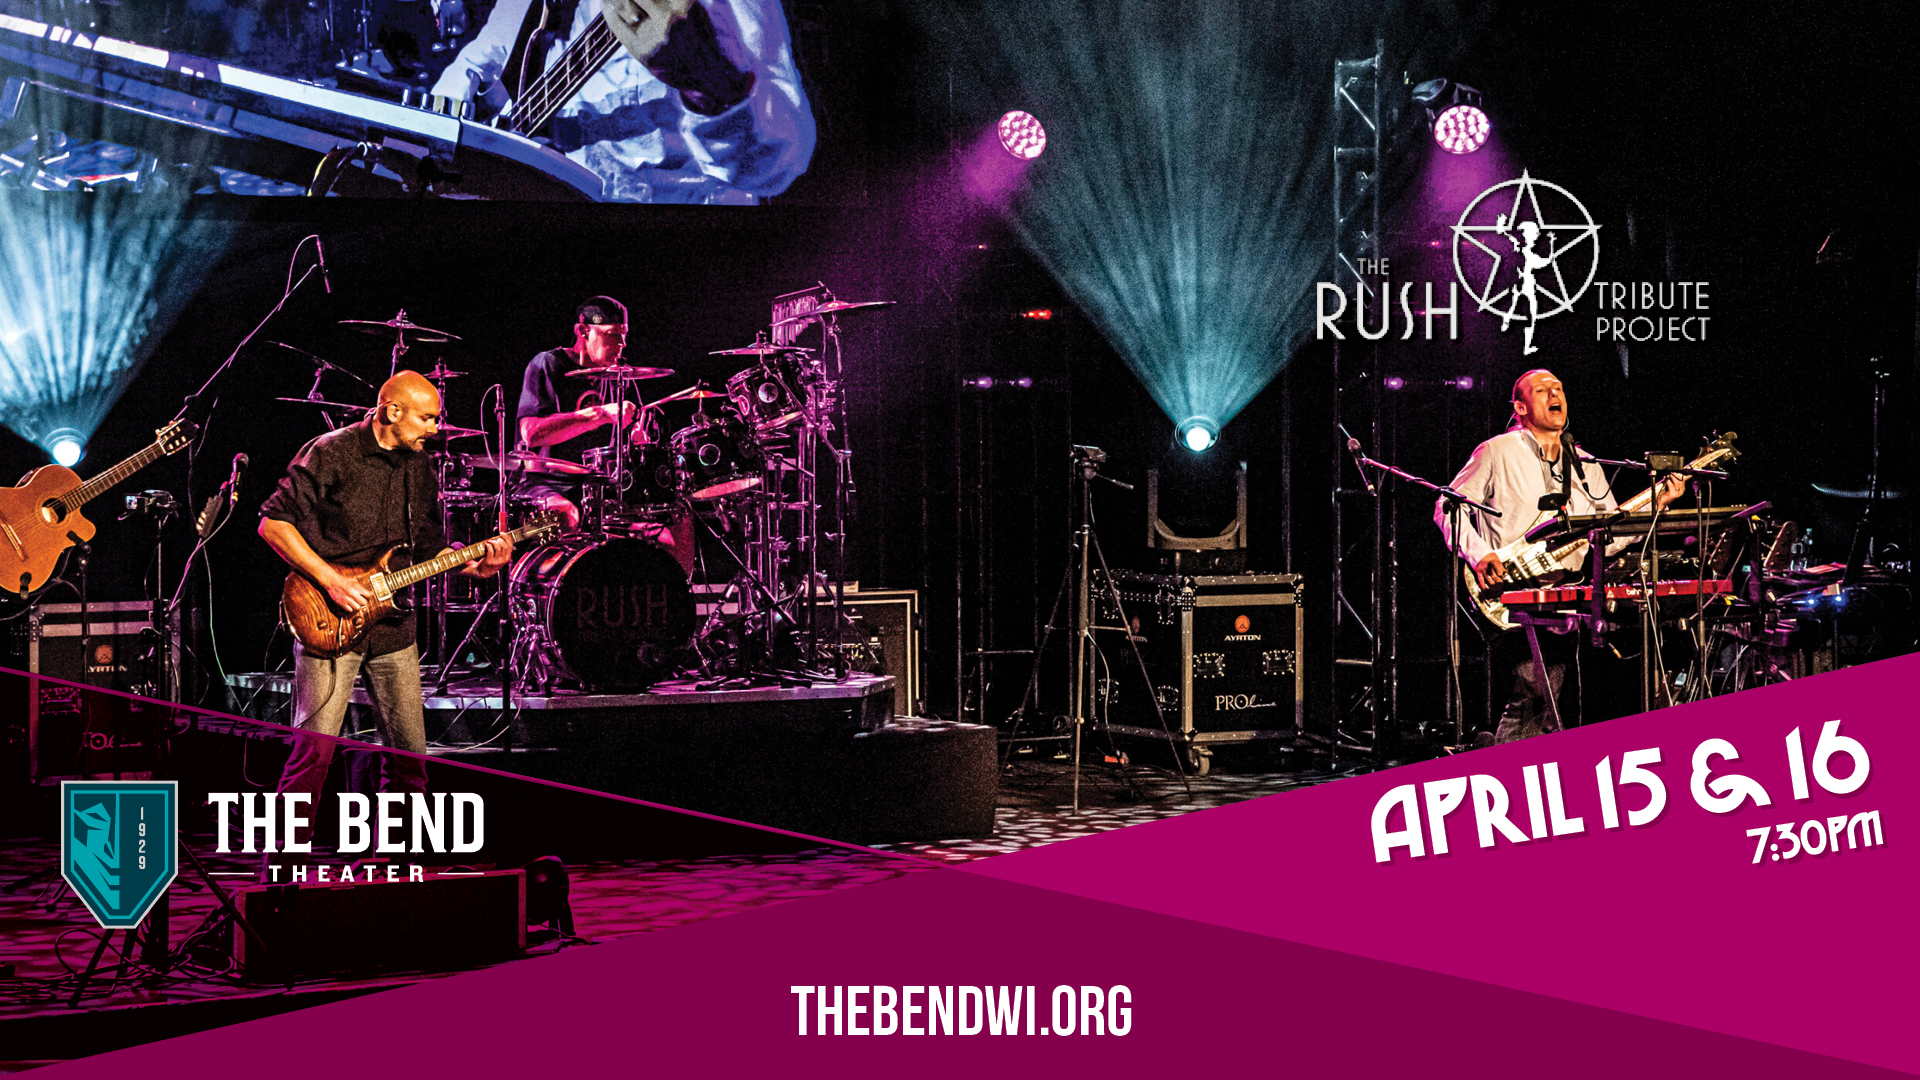 The Rush Tribute Project Live at The Bend Theater